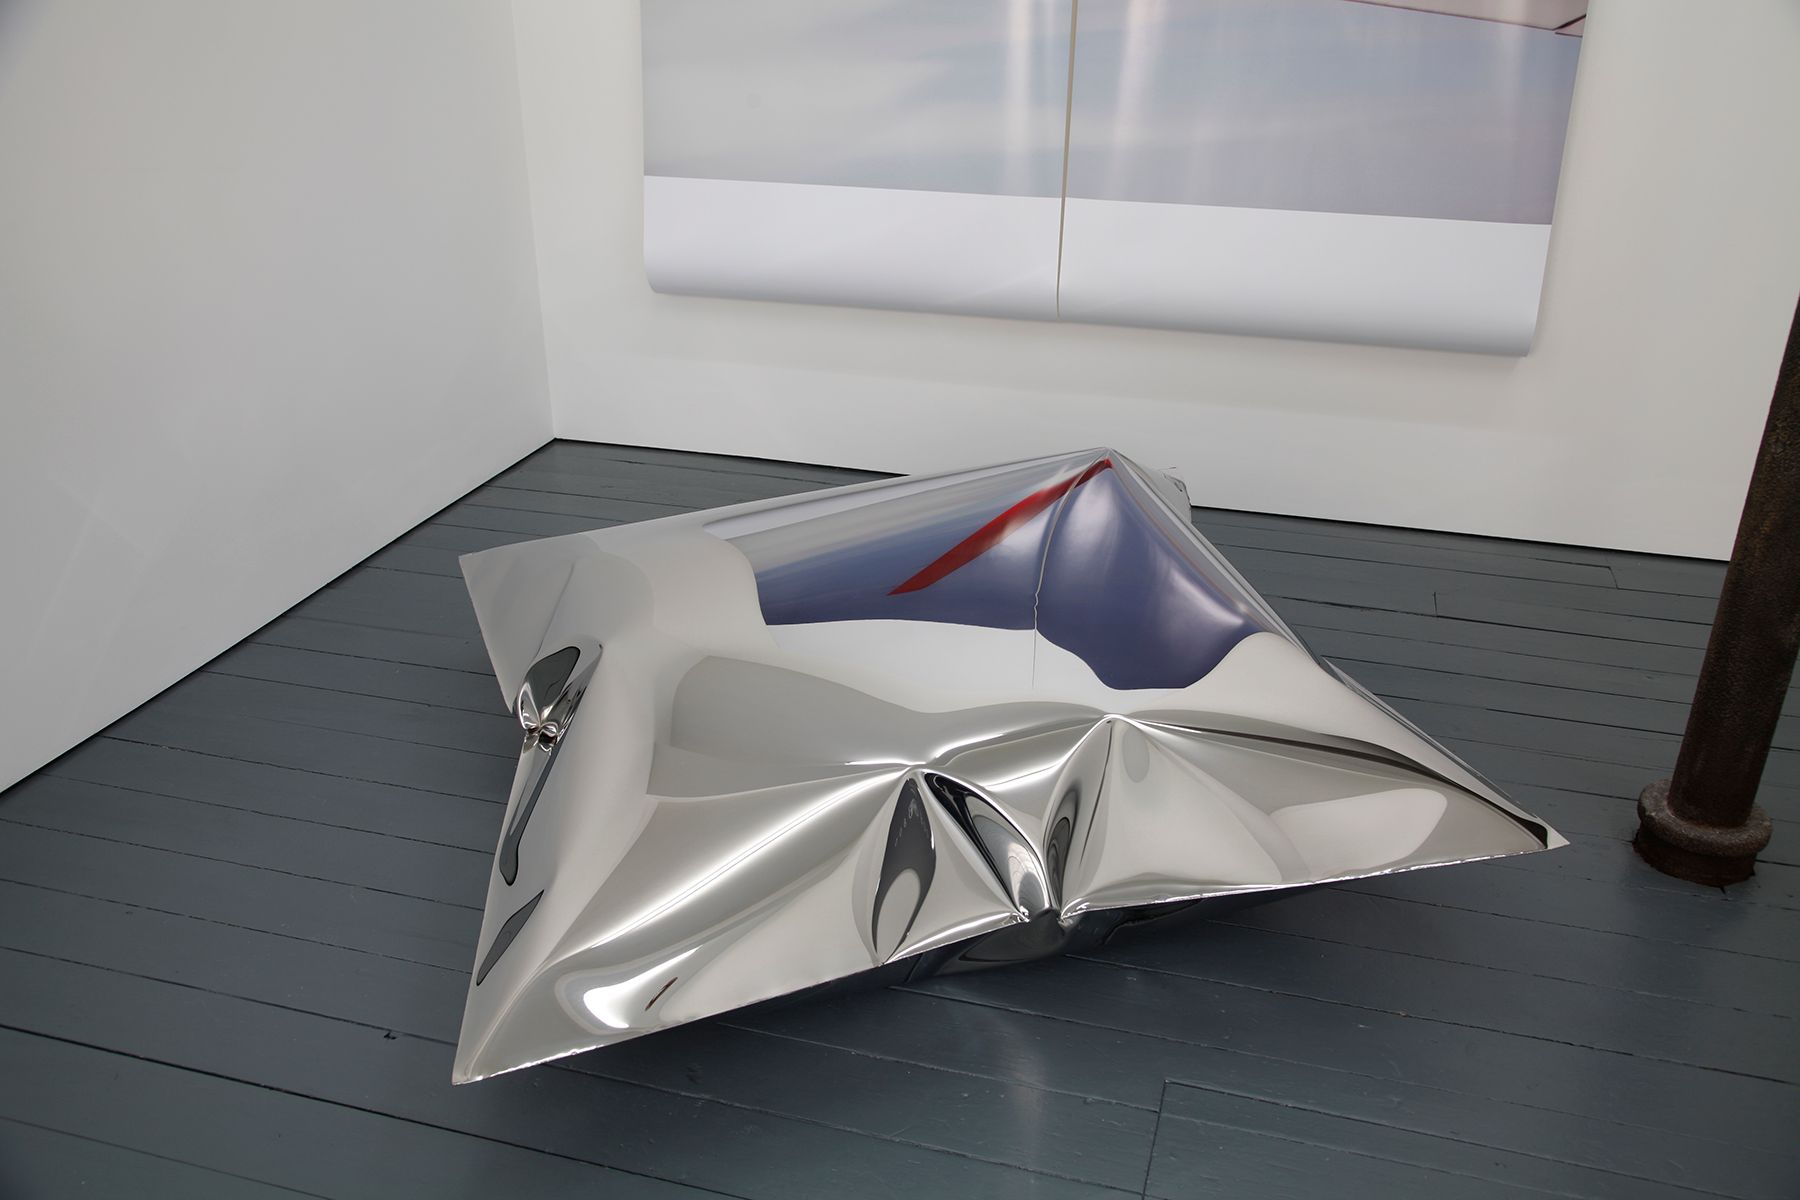 Installation view of inflated steel form, 2012